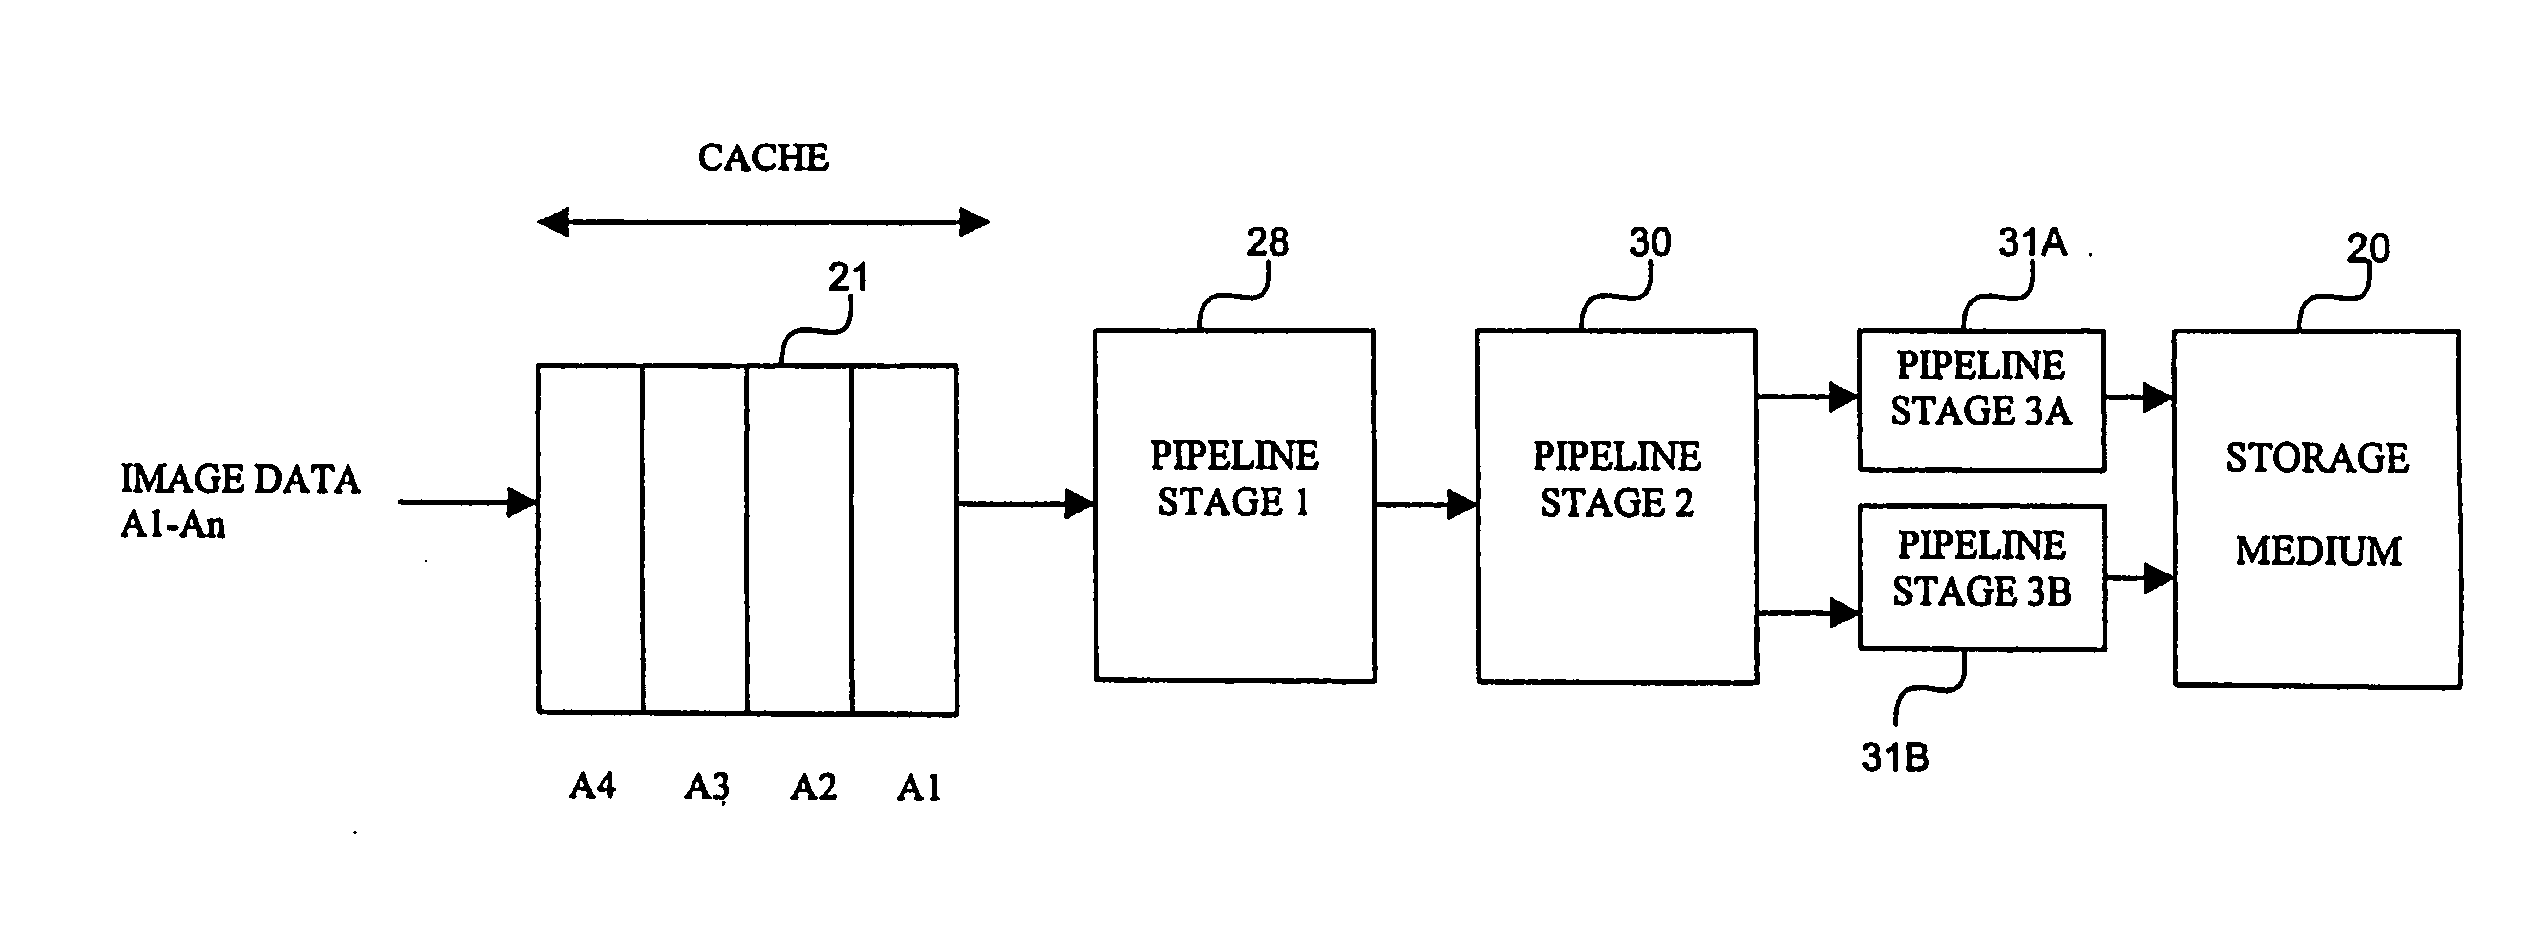 Method and apparatus for reducing image acquisition time in a digital imaging device